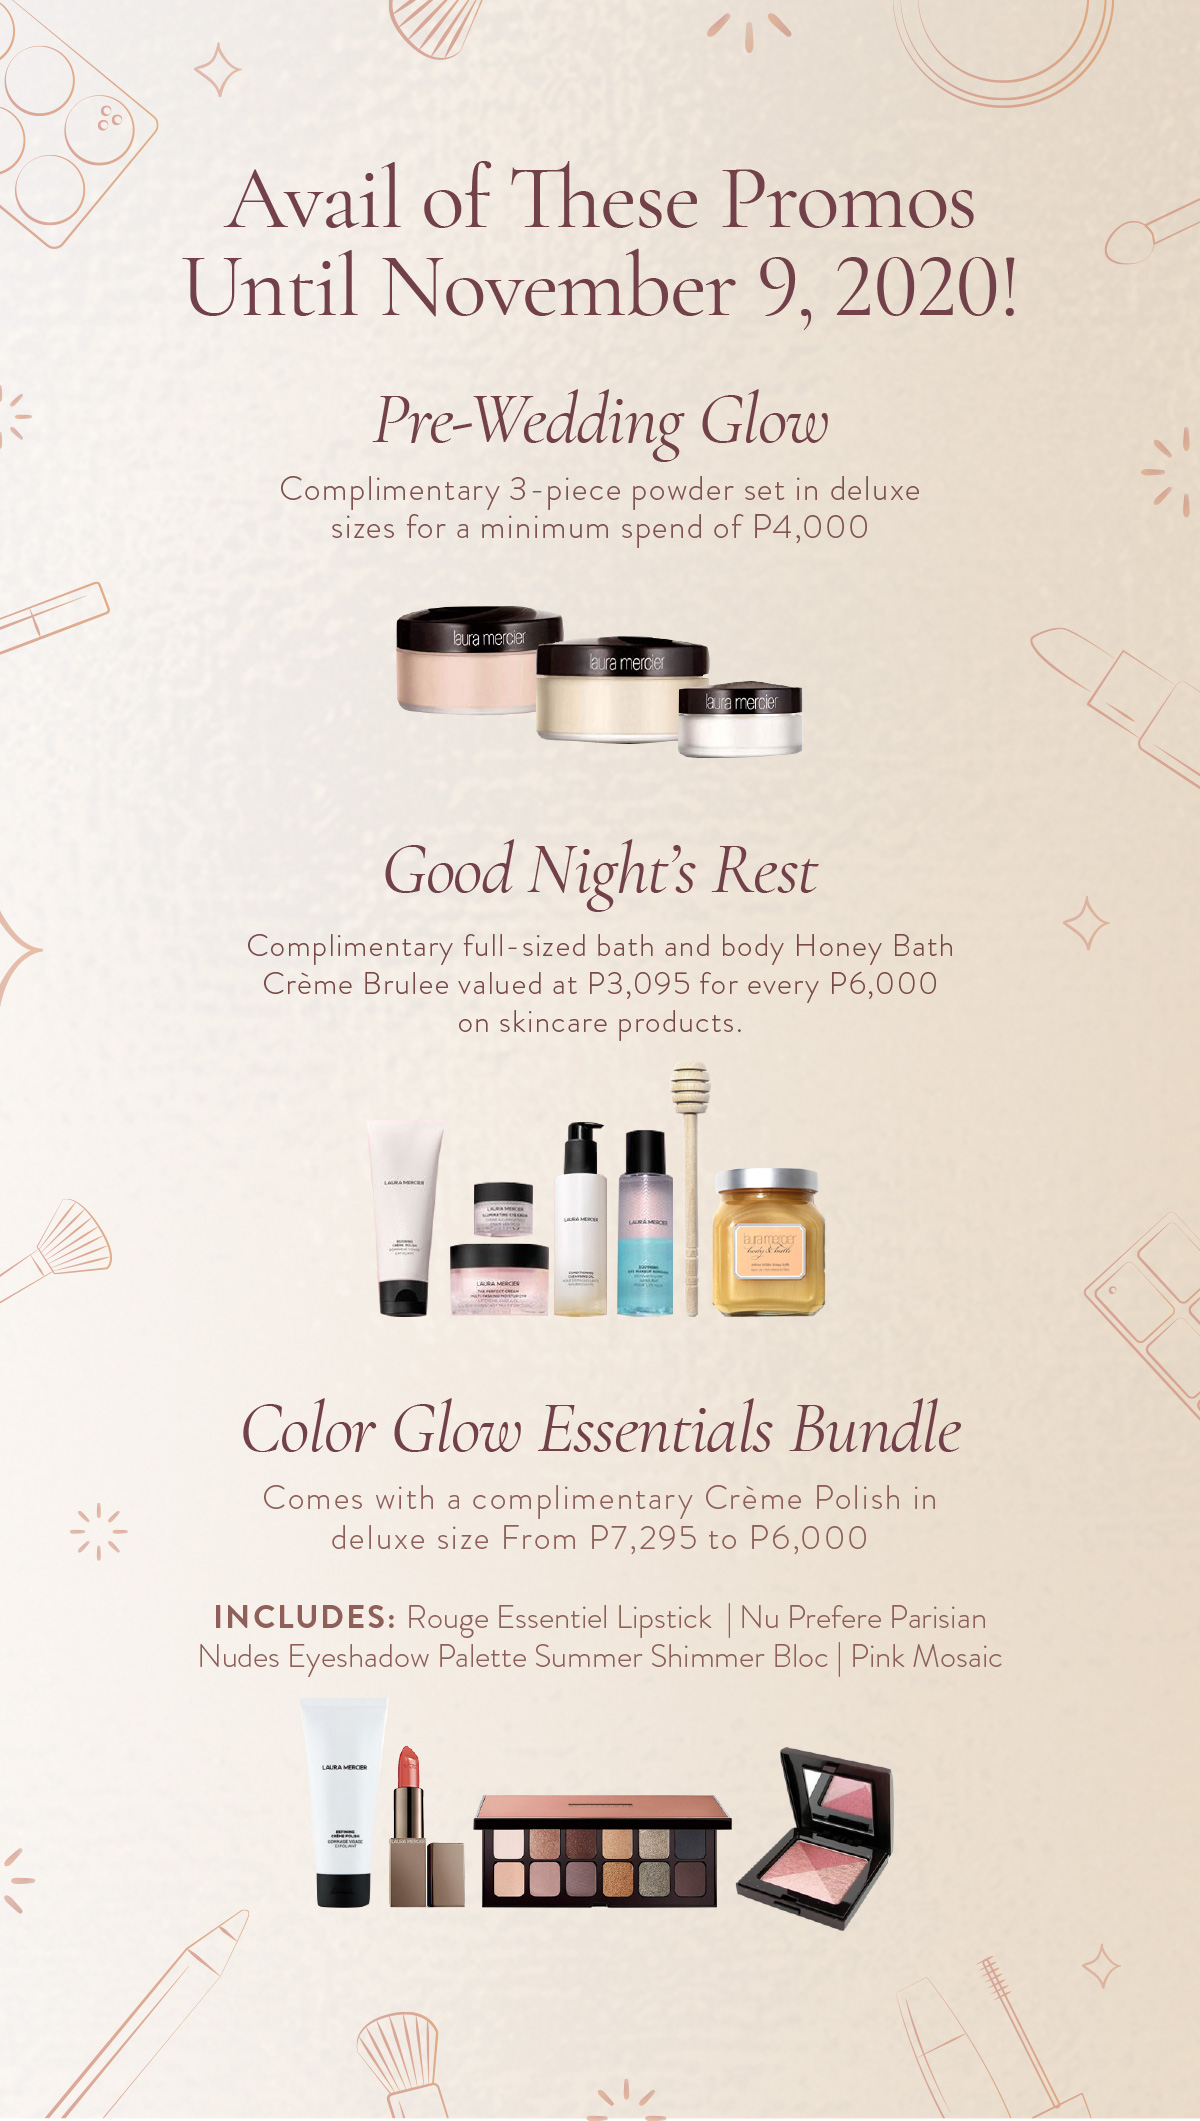 Title: Avail of These Promos Until November 9, 2020! Pre-wedding Glow  Complimentary 3-piece powder set in deluxe sizes for a minimum spend of Php 4,000 (Product) Good Night's Rest  Complimentary full-sized bath and body Honey Bath Creme Brulee valued at Php 3,095 for every Php 6,000 on skincare products (Product) Color Glow Essentials Bundle  Comes with a complimentary Creme Polish in deluxe size From PHP7,295 to PHP6,000 Includes: Rouge Essentiel Lipstick Nu Prefere, Parisian Nudes Eyeshadow Palette Summer, Shimmer Bloc Pink Mosaic (Product)